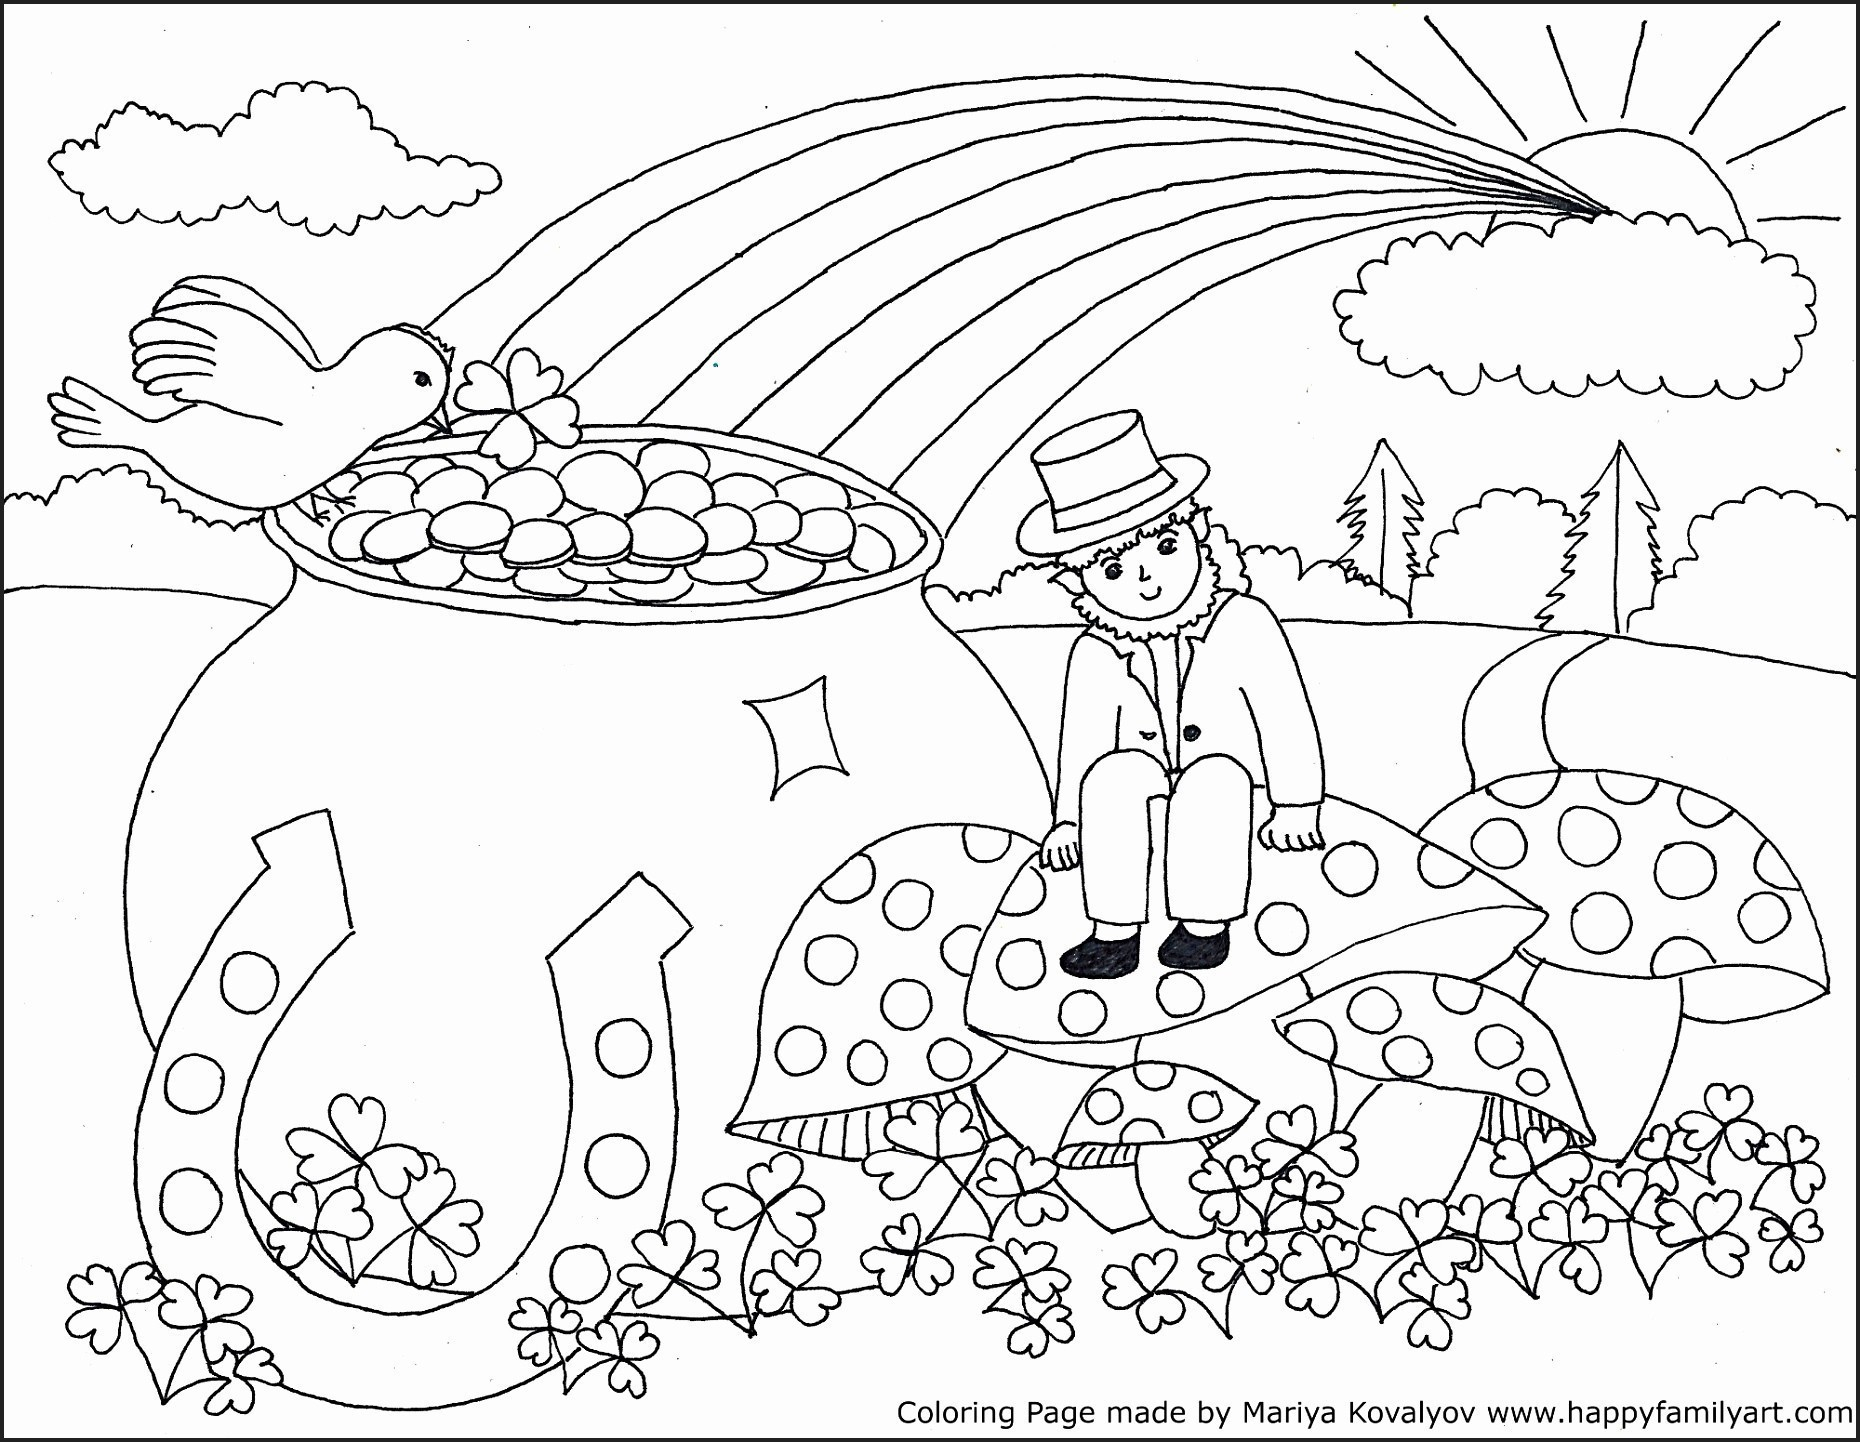 Coloring Pages : St Patricks Dayng Pages For Kids With Medquit Free - Free Printable St Patrick Day Coloring Pages